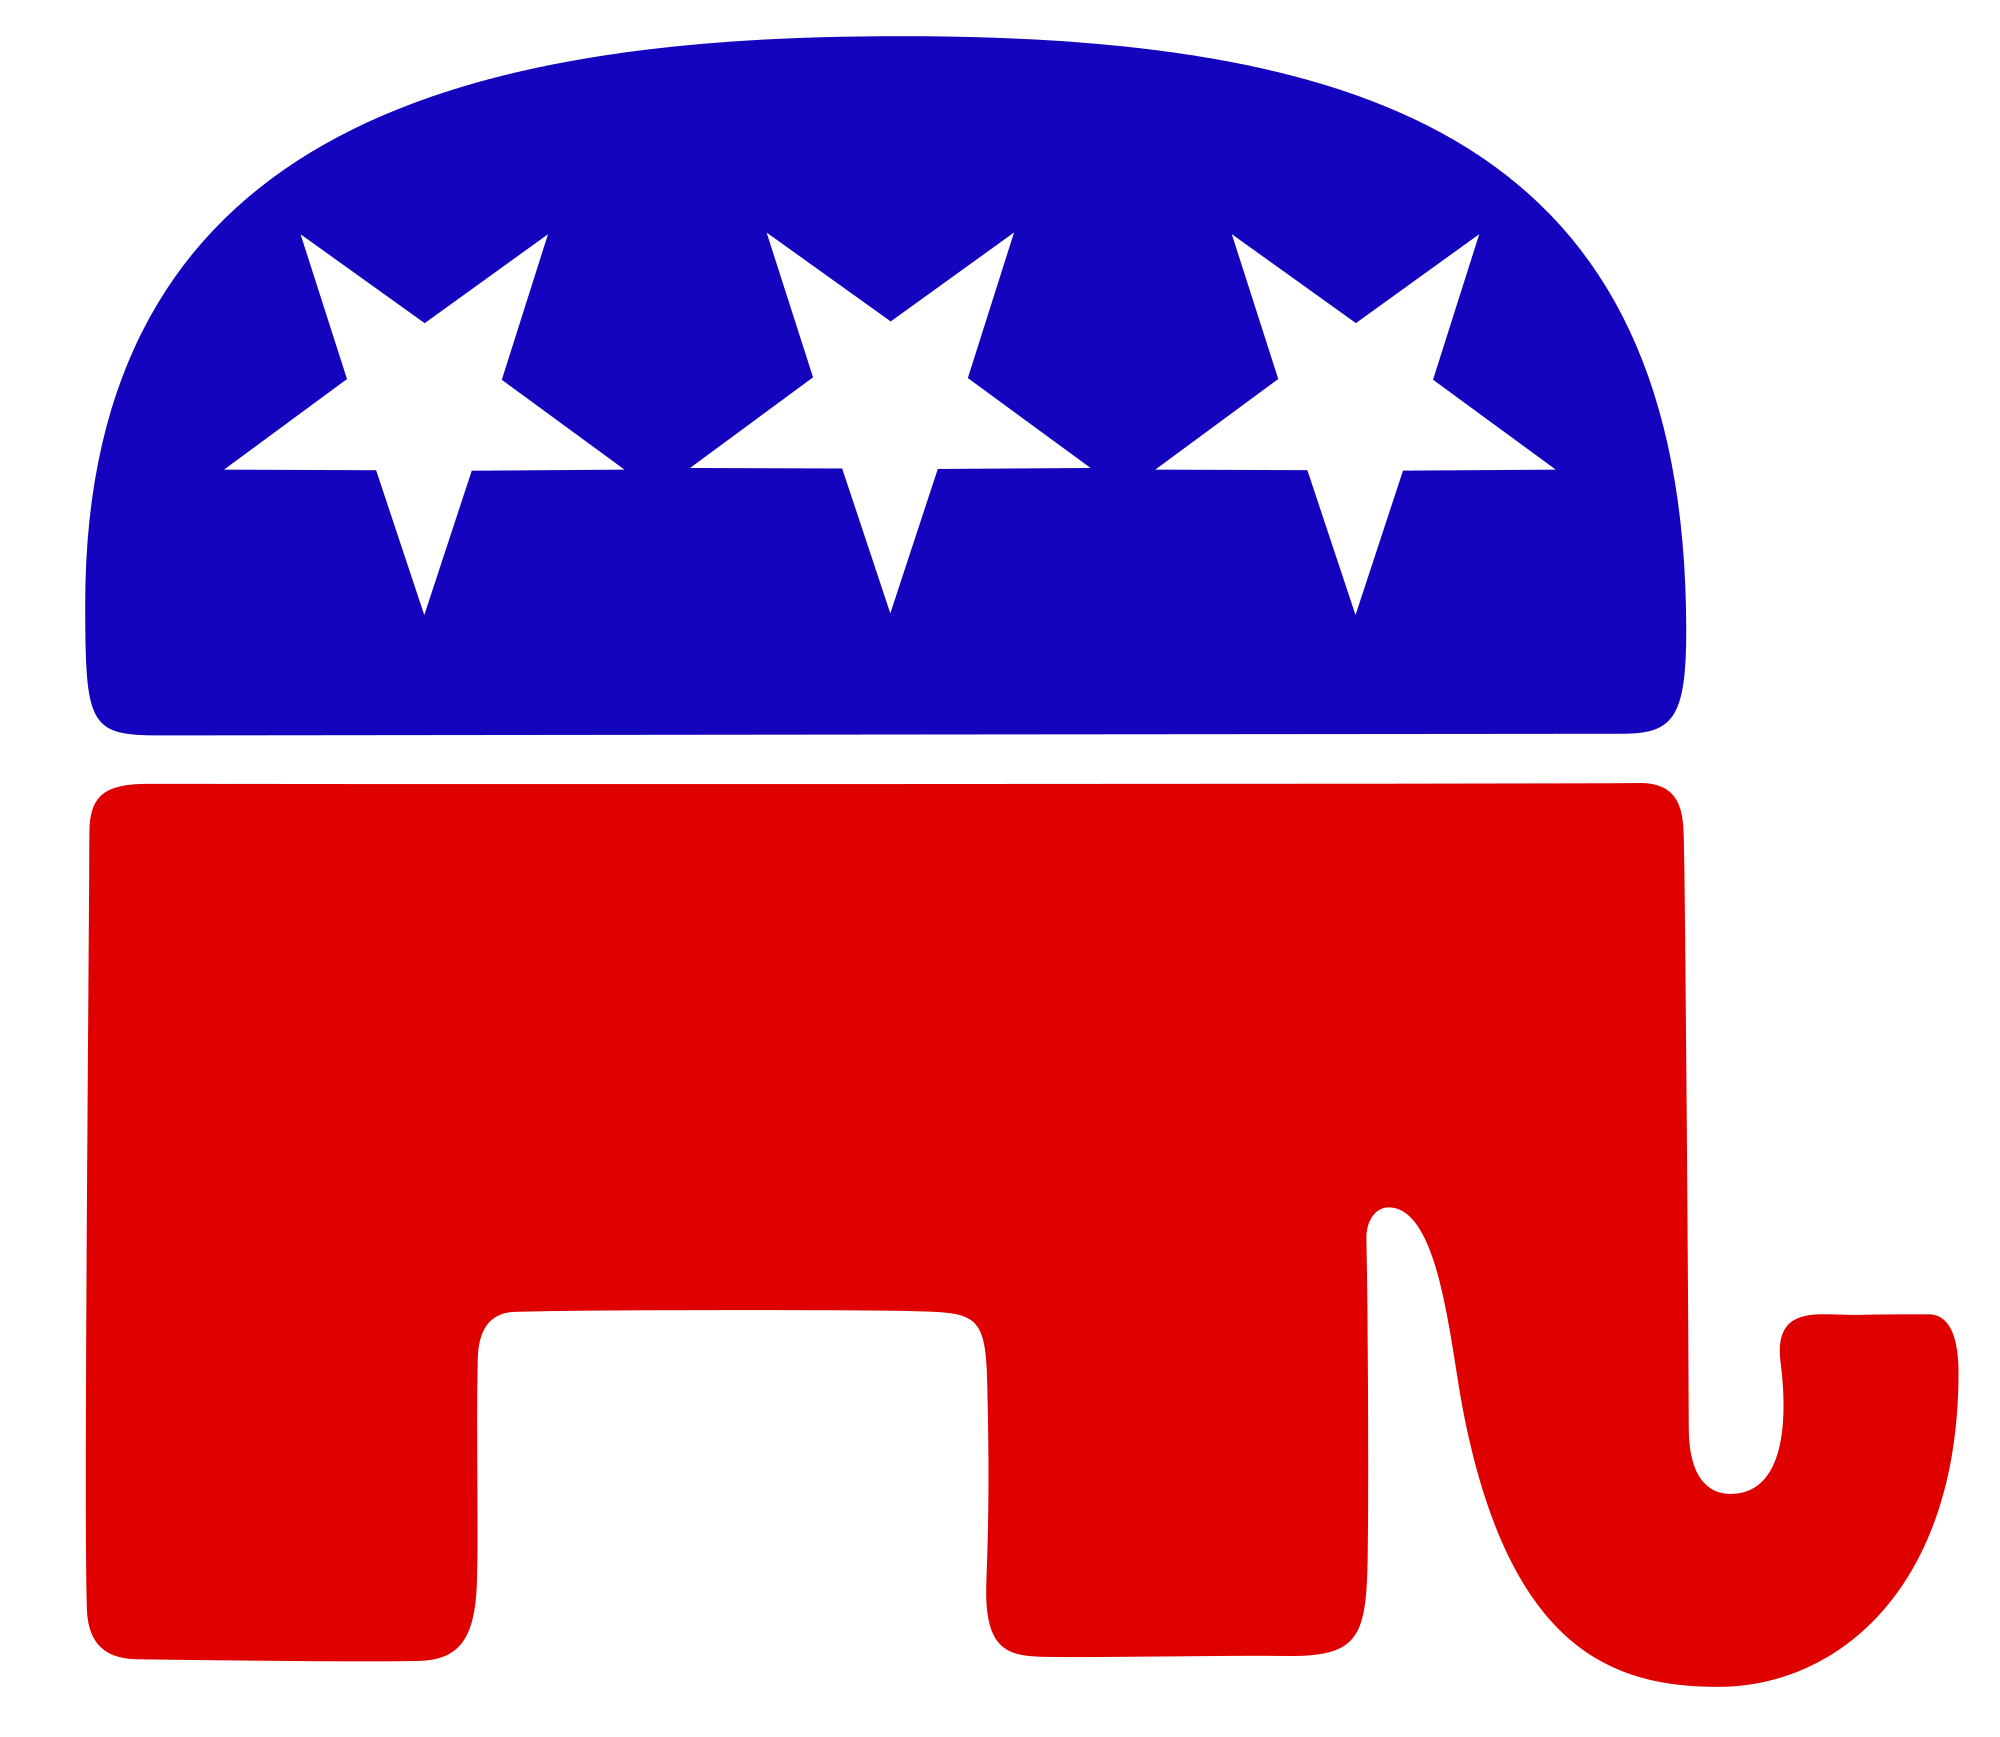 Republican Party (United States) - Wikipedia, the free encyclopedia